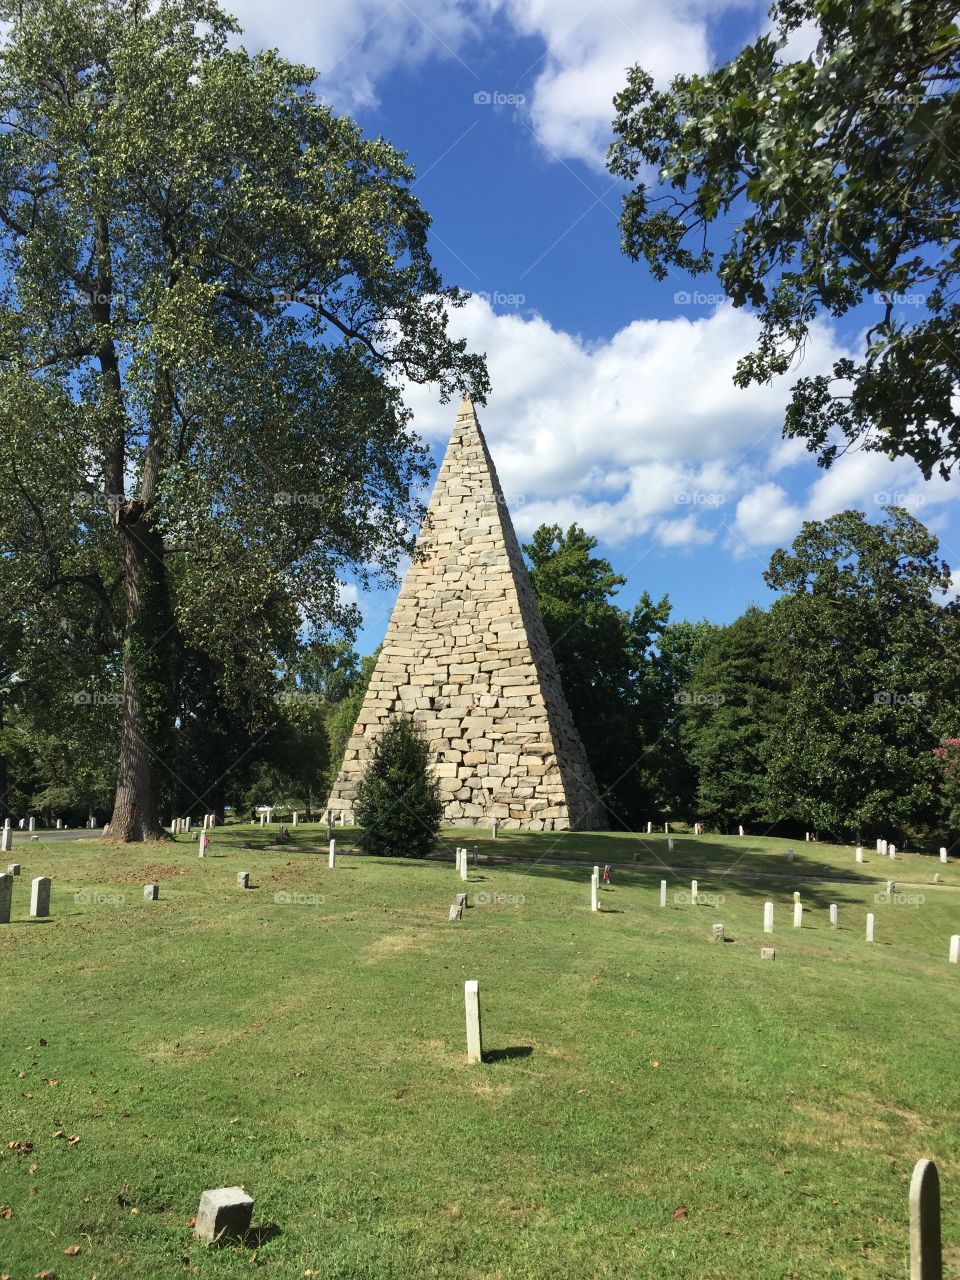 Monument to the Confederate Dead, Hollywood Cemetery, Richmond, Virginia -
90 ft pyramid built in honor of the 18000 Confederate Soldiers buried at Hollywood Cemetery